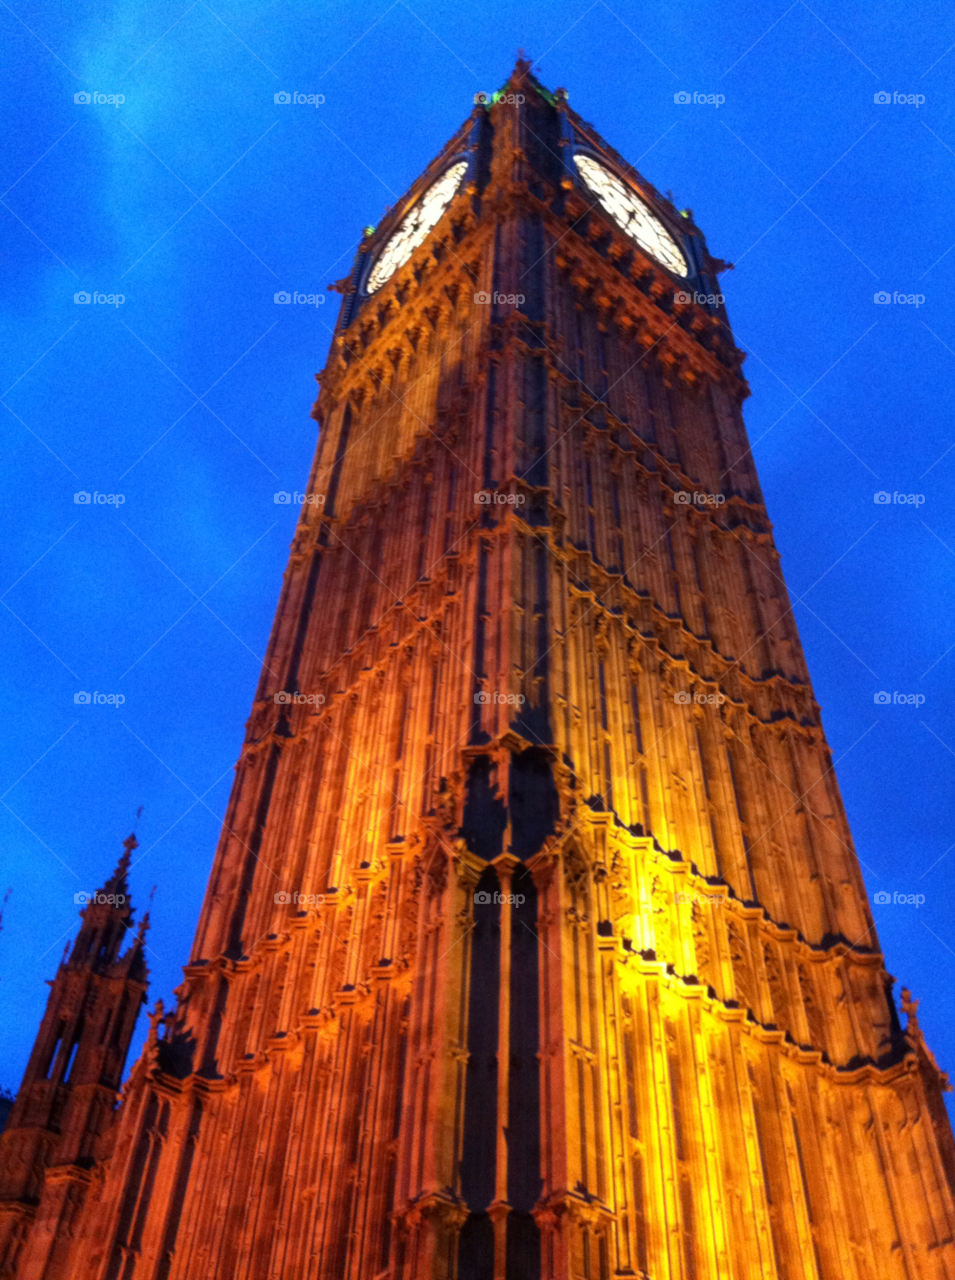 london bigben clock tower by jeanello